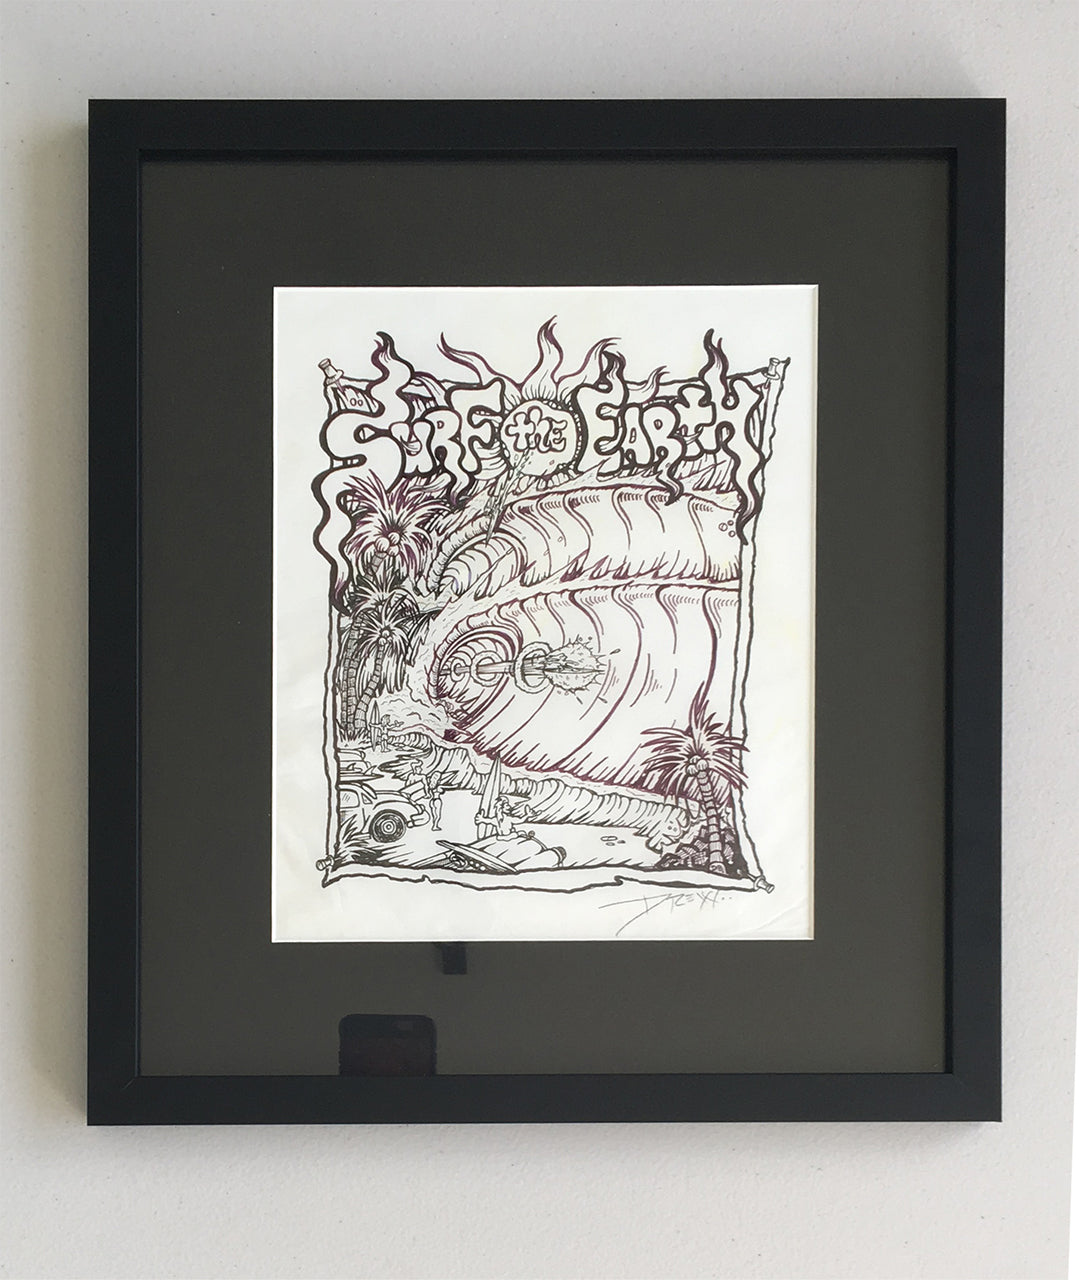 SOLD! 1995 Surf the Earth Tee Shirt Design ink sketch on Paper 16" x 17" Framed in black frame and plexiglass